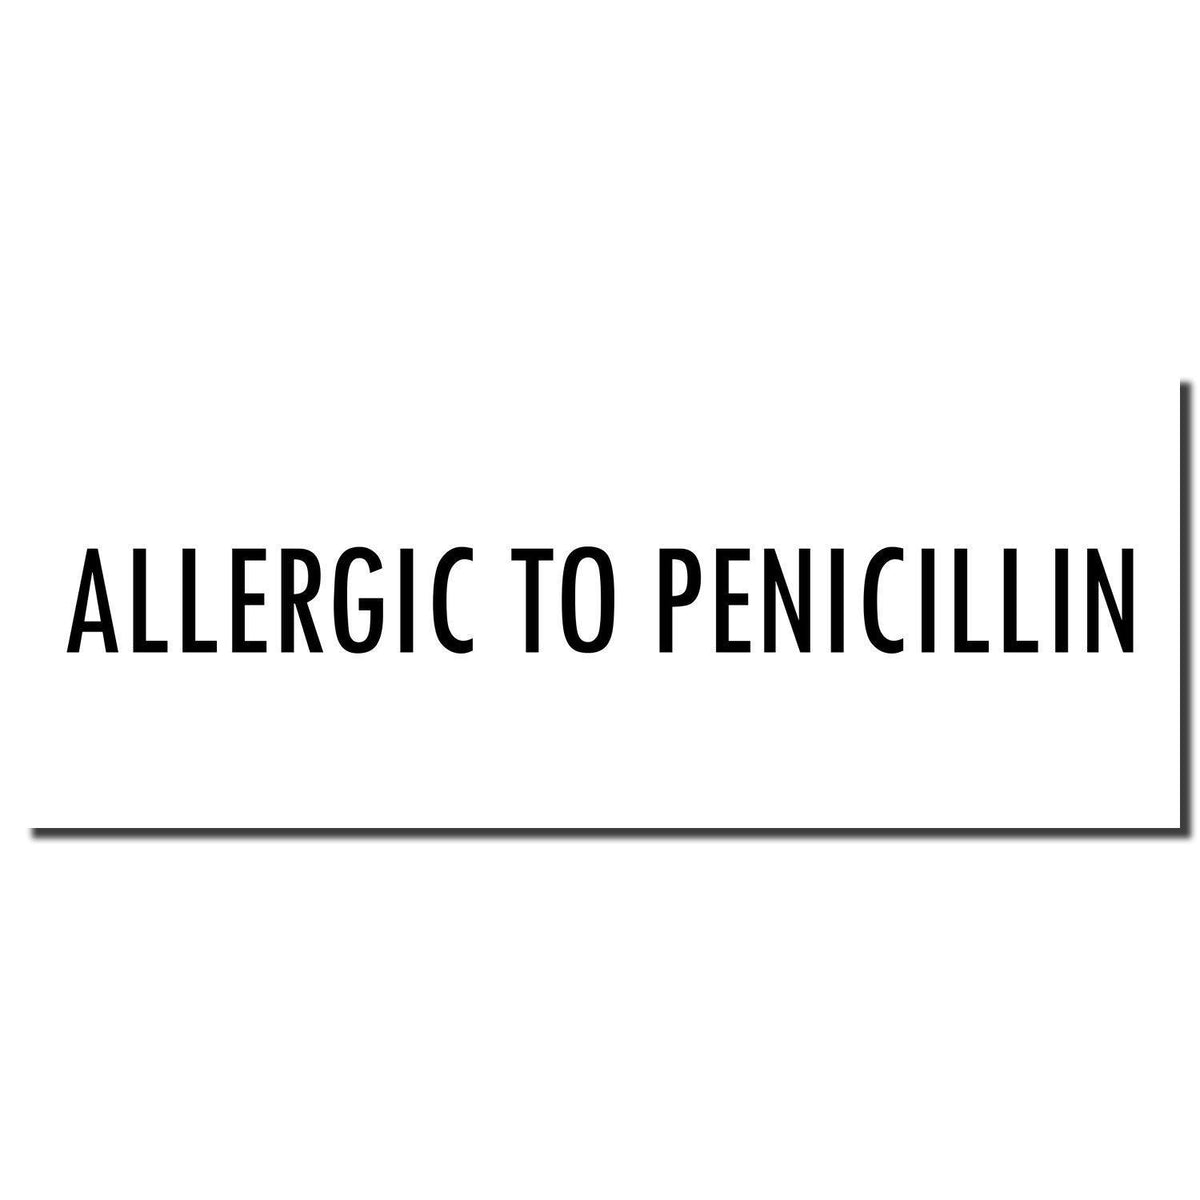 Self Inking Allergic To Penicillin Stamp - Engineer Seal Stamps - Brand_Trodat, Impression Size_Small, Stamp Type_Self-Inking Stamp, Type of Use_Medical Office